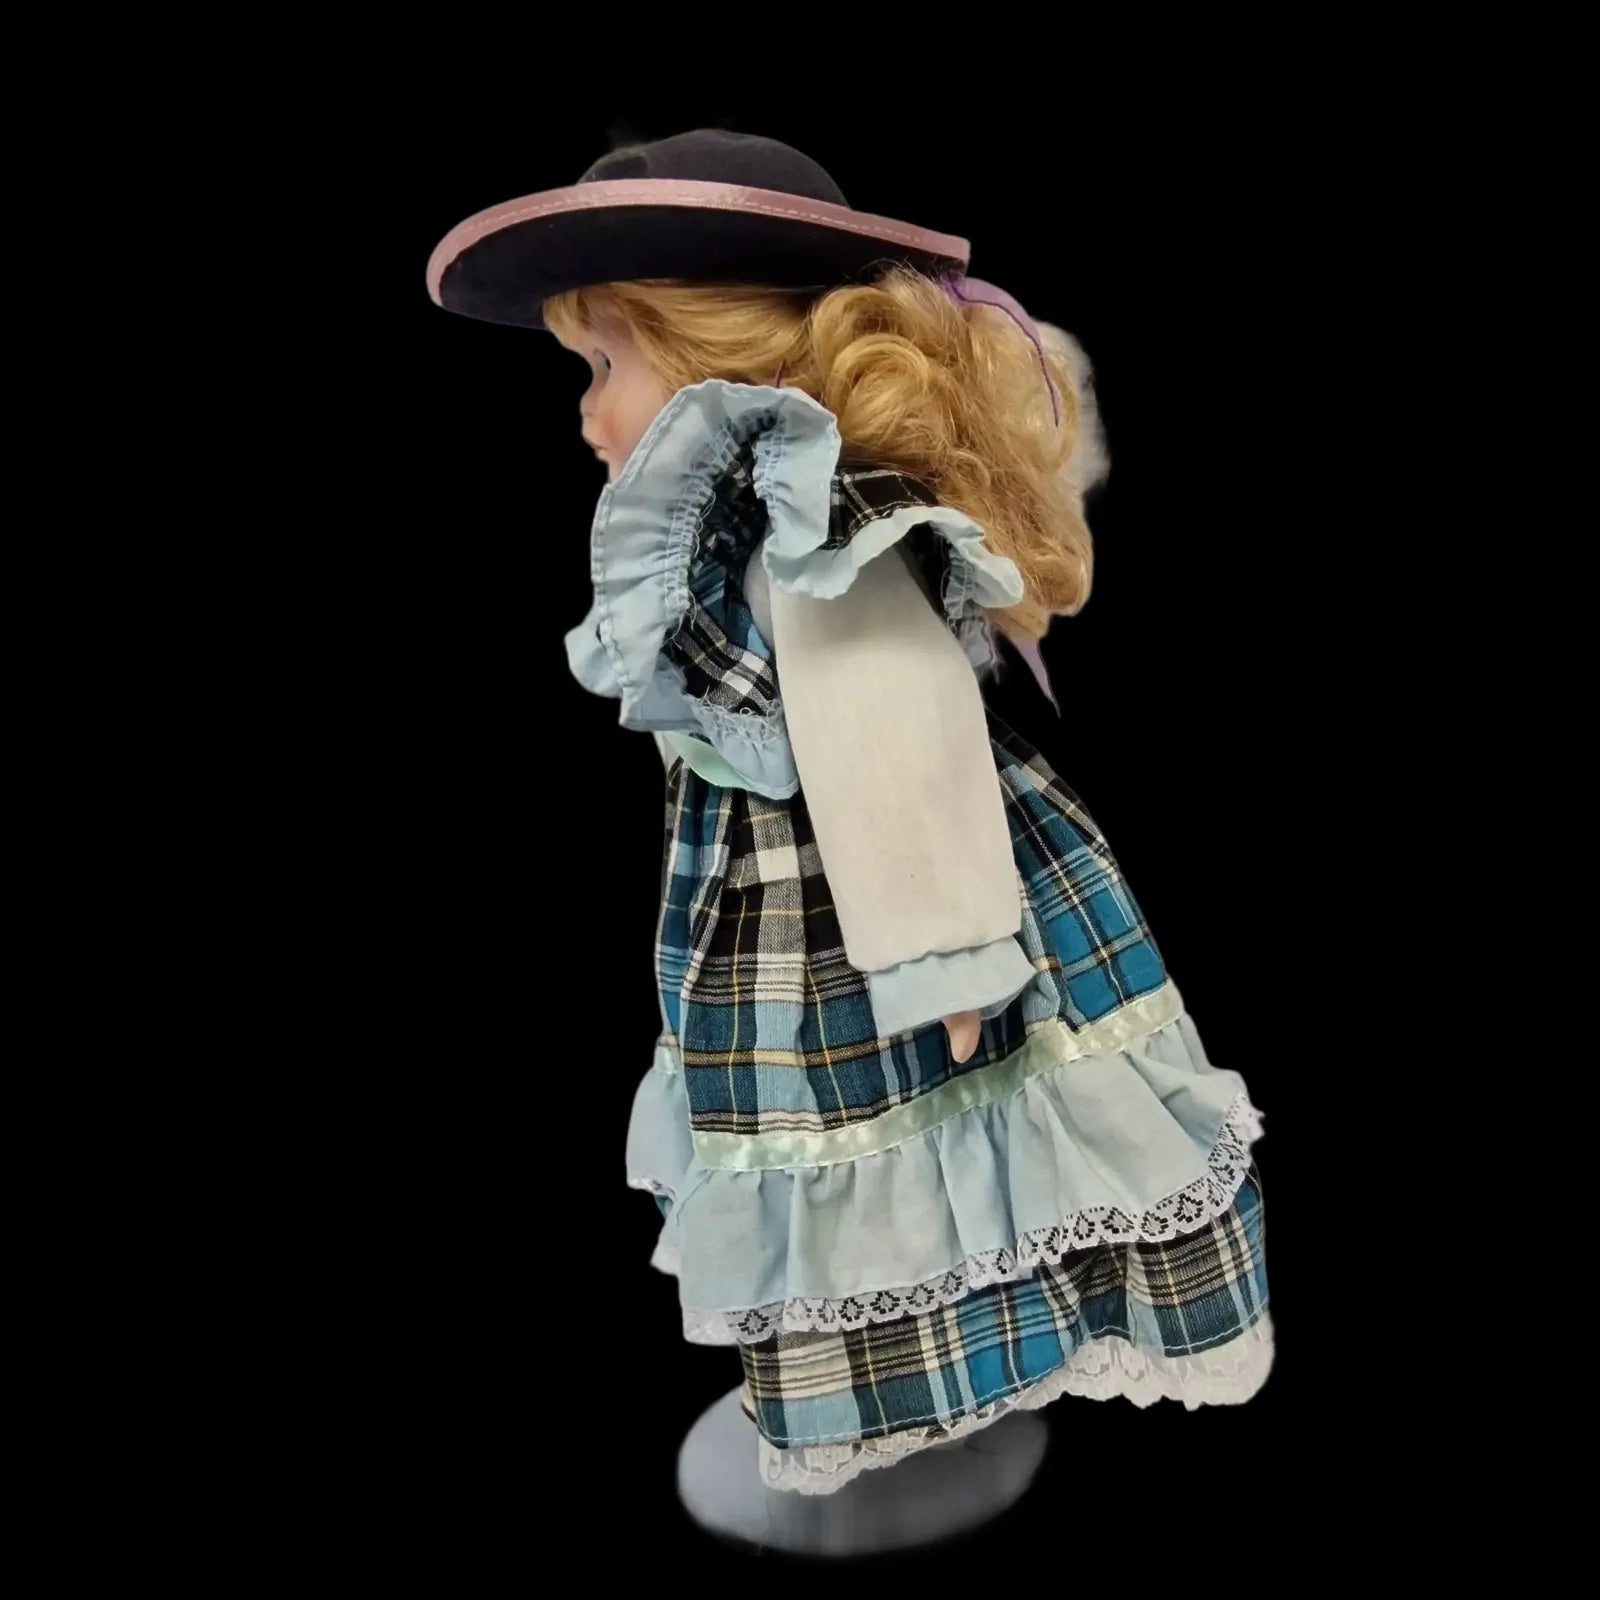 Porcelain Doll Female Tartan Dress Display Stand Removeable